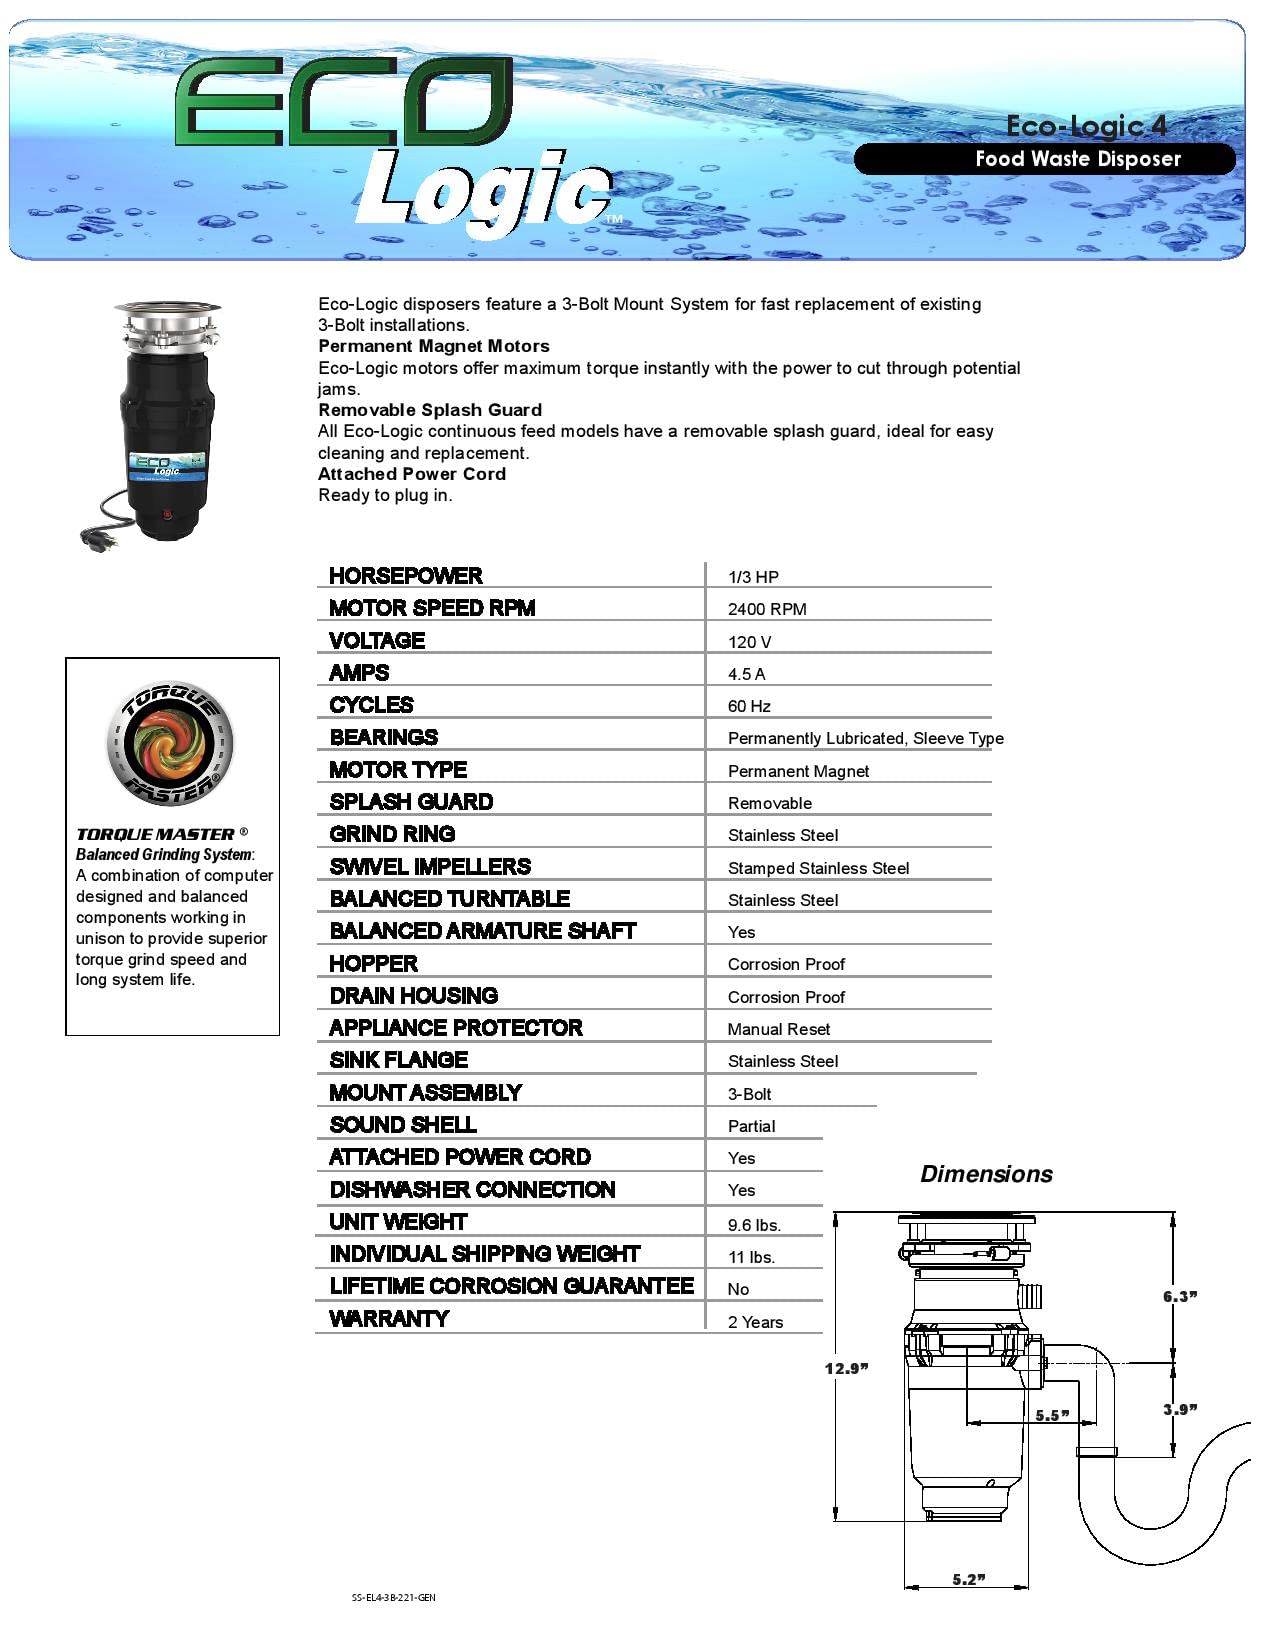 Eco Logic 10-US-EL-4-3B 1/3 Horsepower Garbage Disposal with Removeable Splash Guard, Attached Power Cord and Standard 3-Bolt Mounting System, Continuous Feed, Black